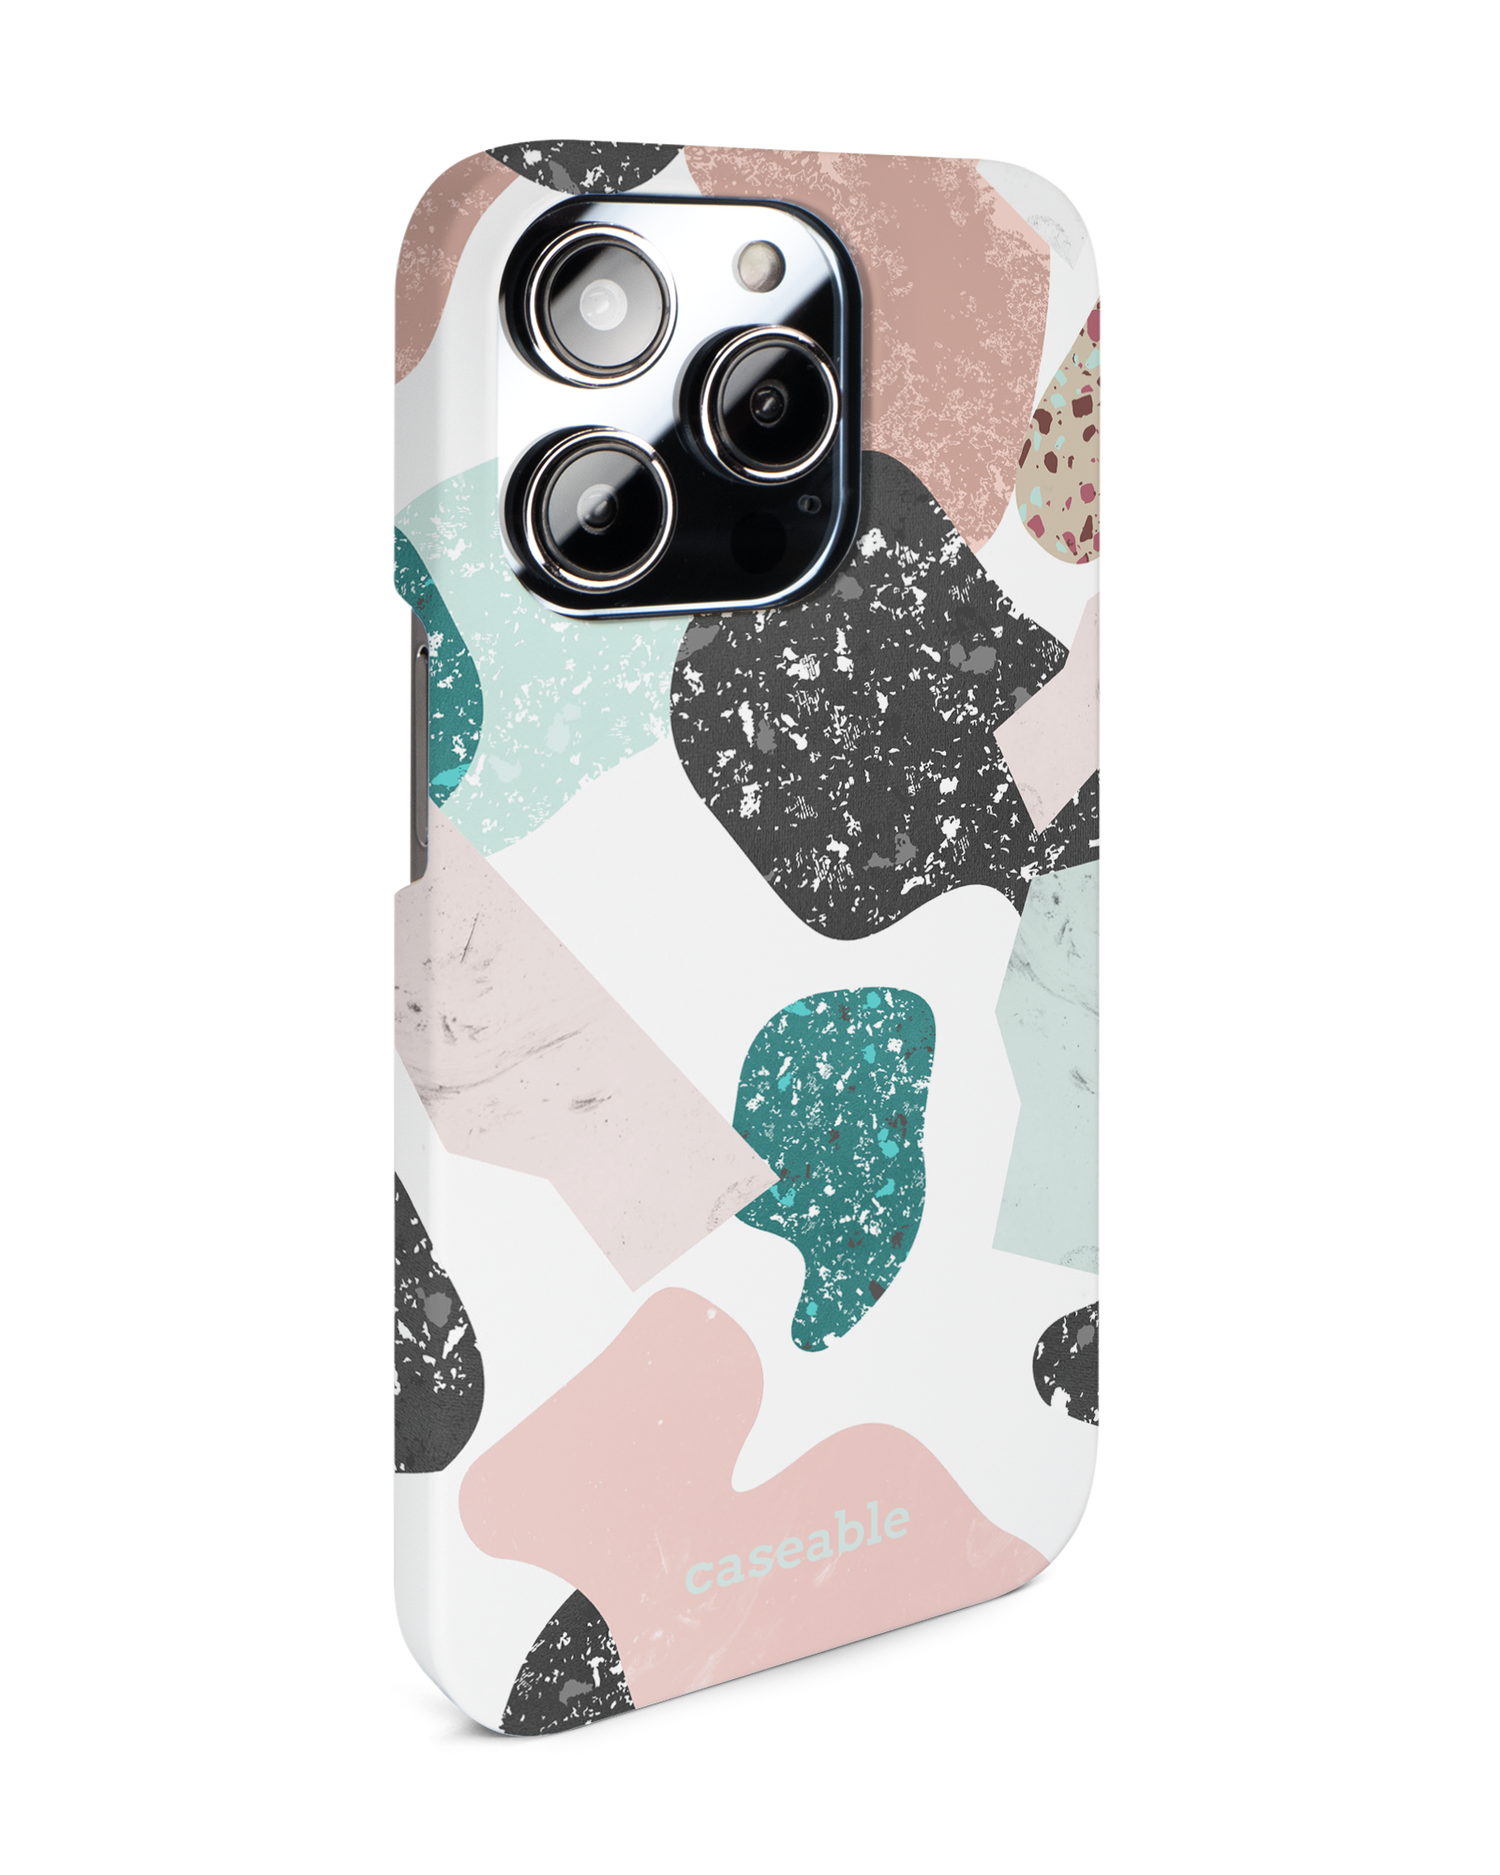 Scattered Shapes Hard Shell Phone Case for Apple iPhone 14 Pro: View from the left side